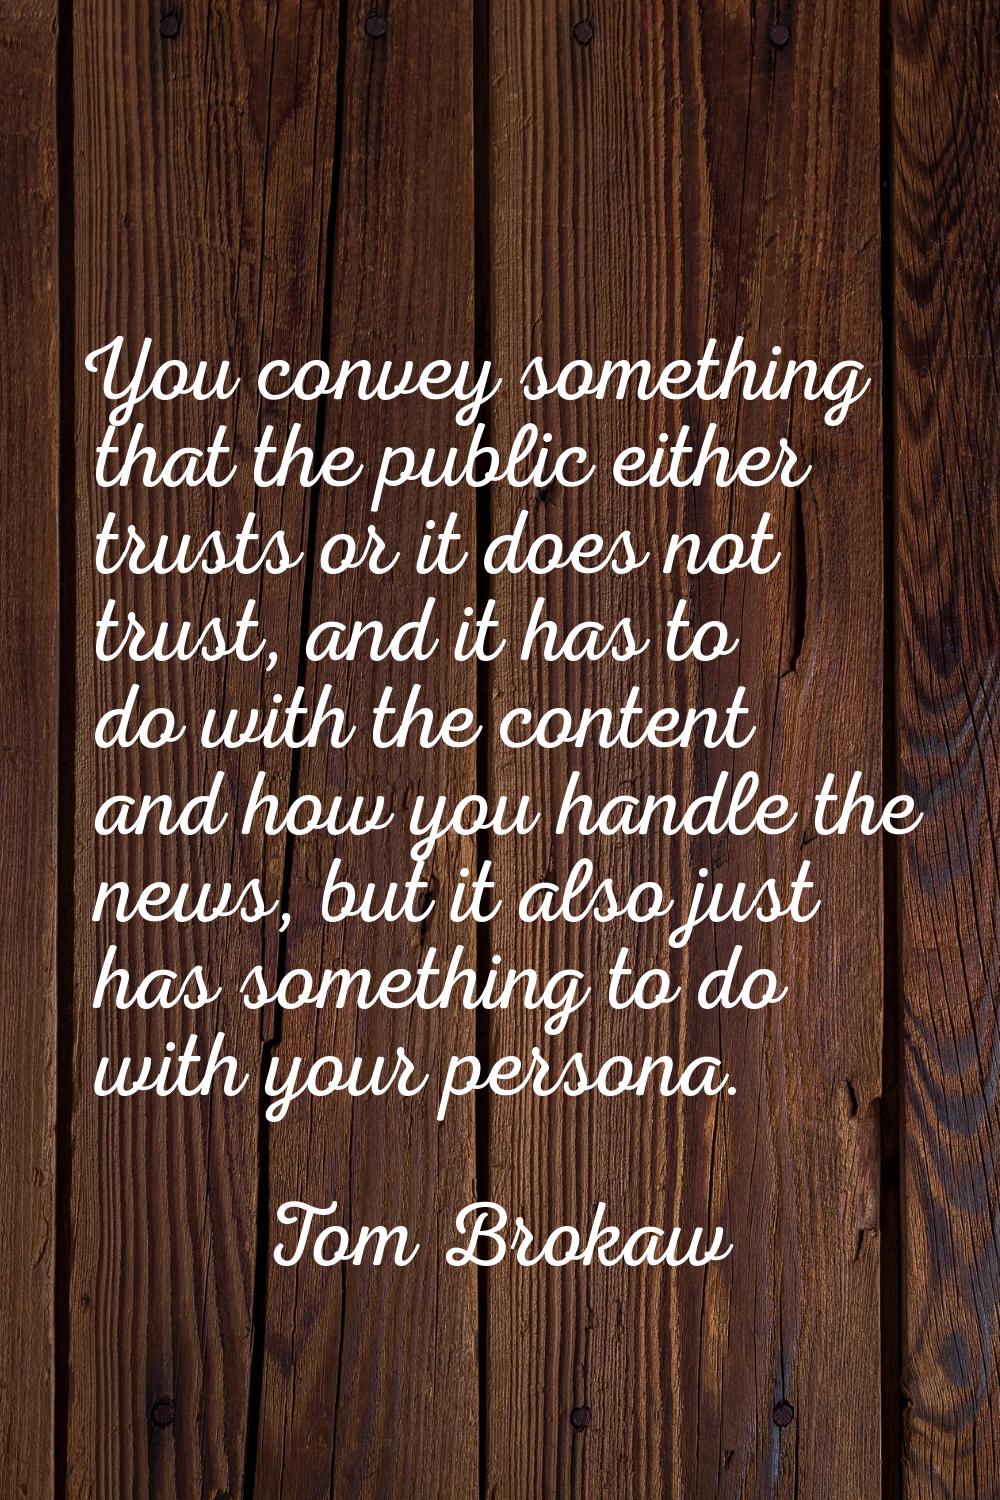 You convey something that the public either trusts or it does not trust, and it has to do with the 